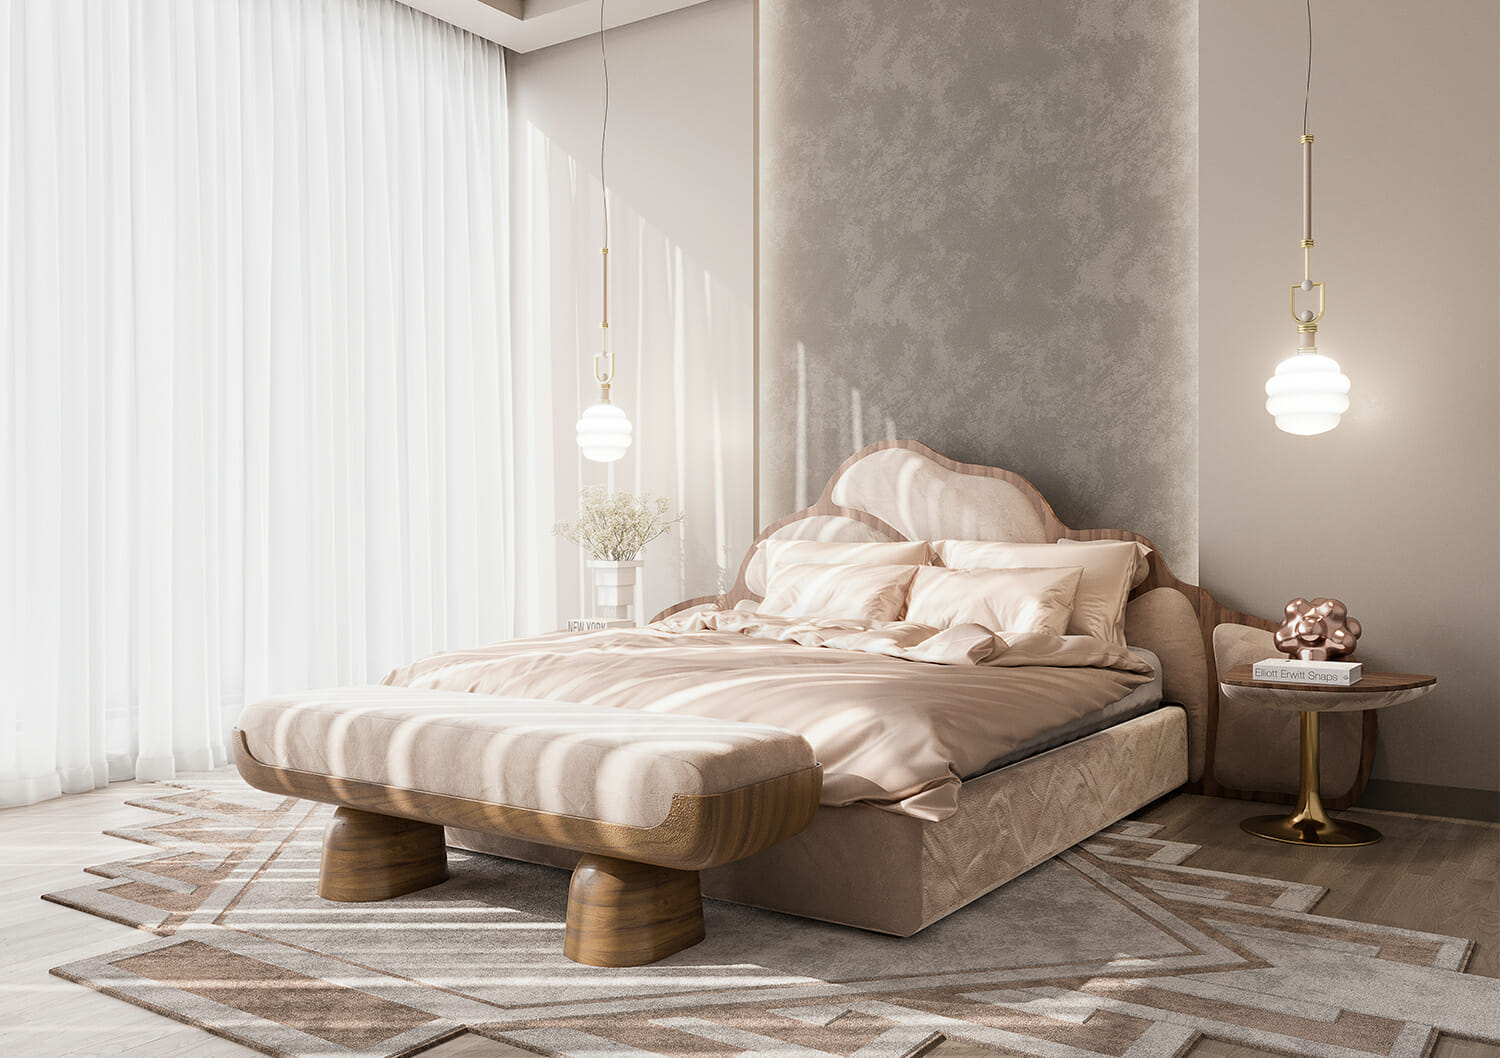 neutral shaded bedroom decor with a organic bed, pendant light and bench